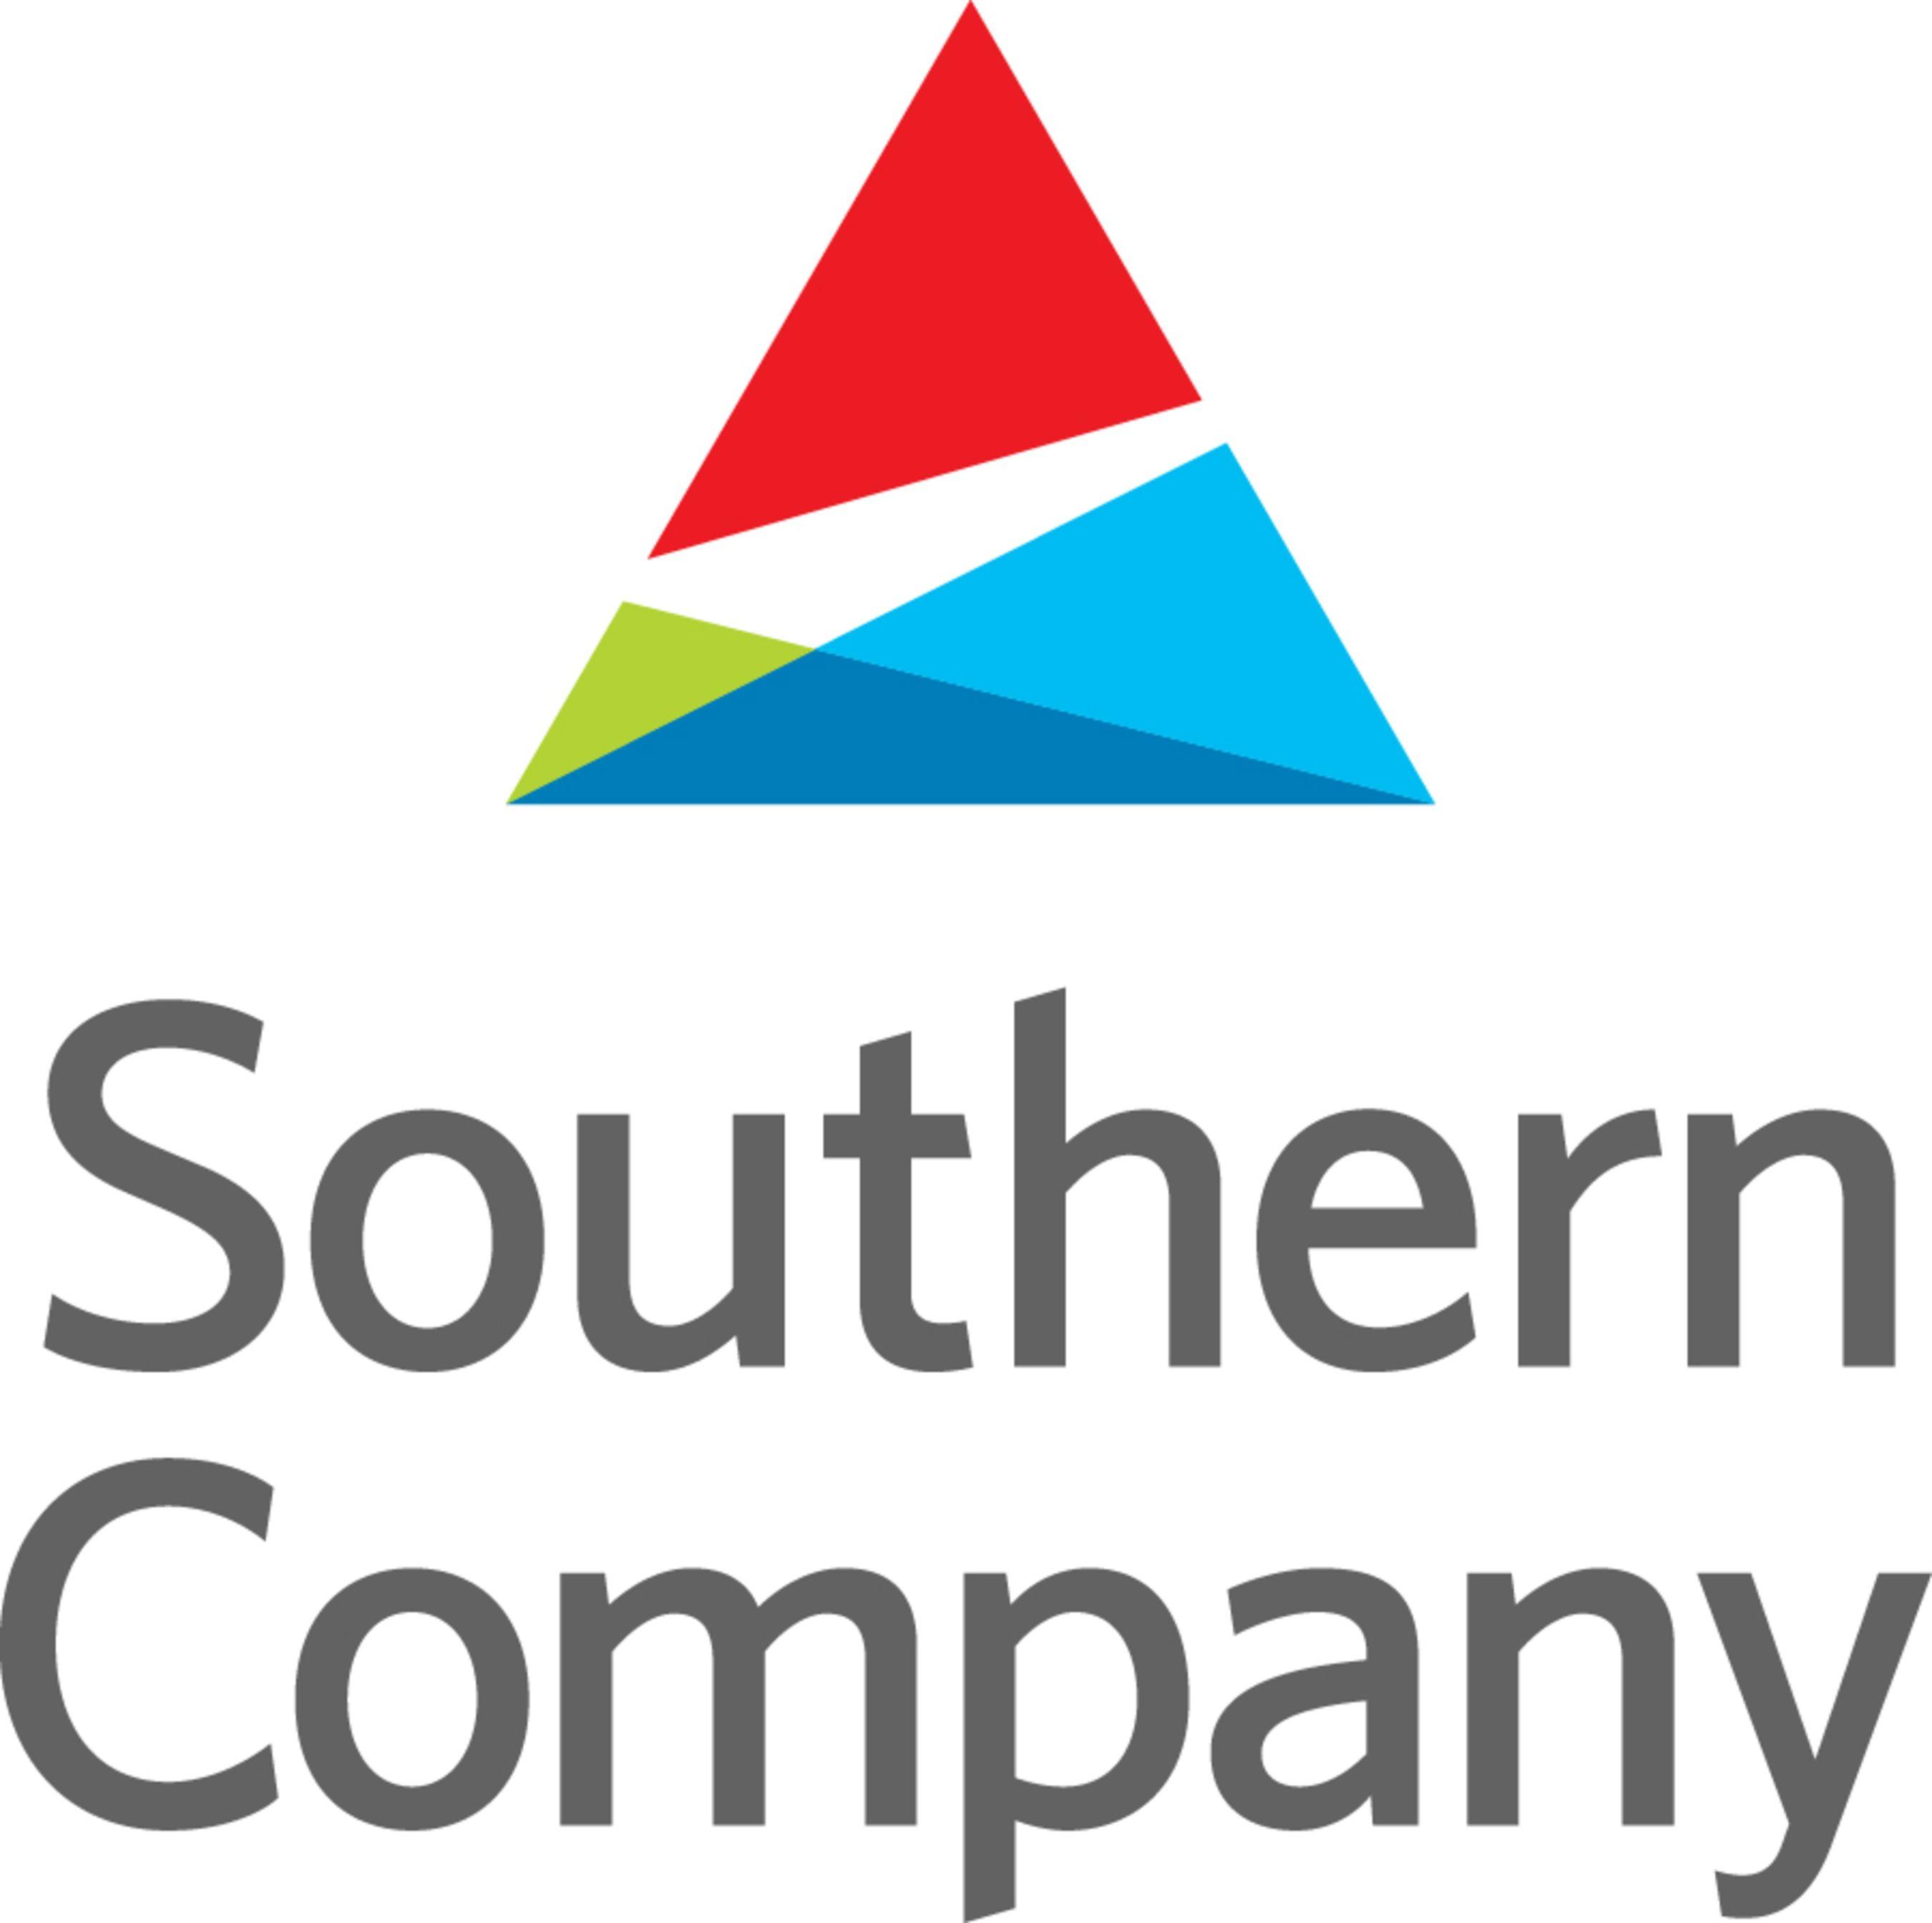 South Korean Company Logo - South Korean company signs first letter of intent to explore ...